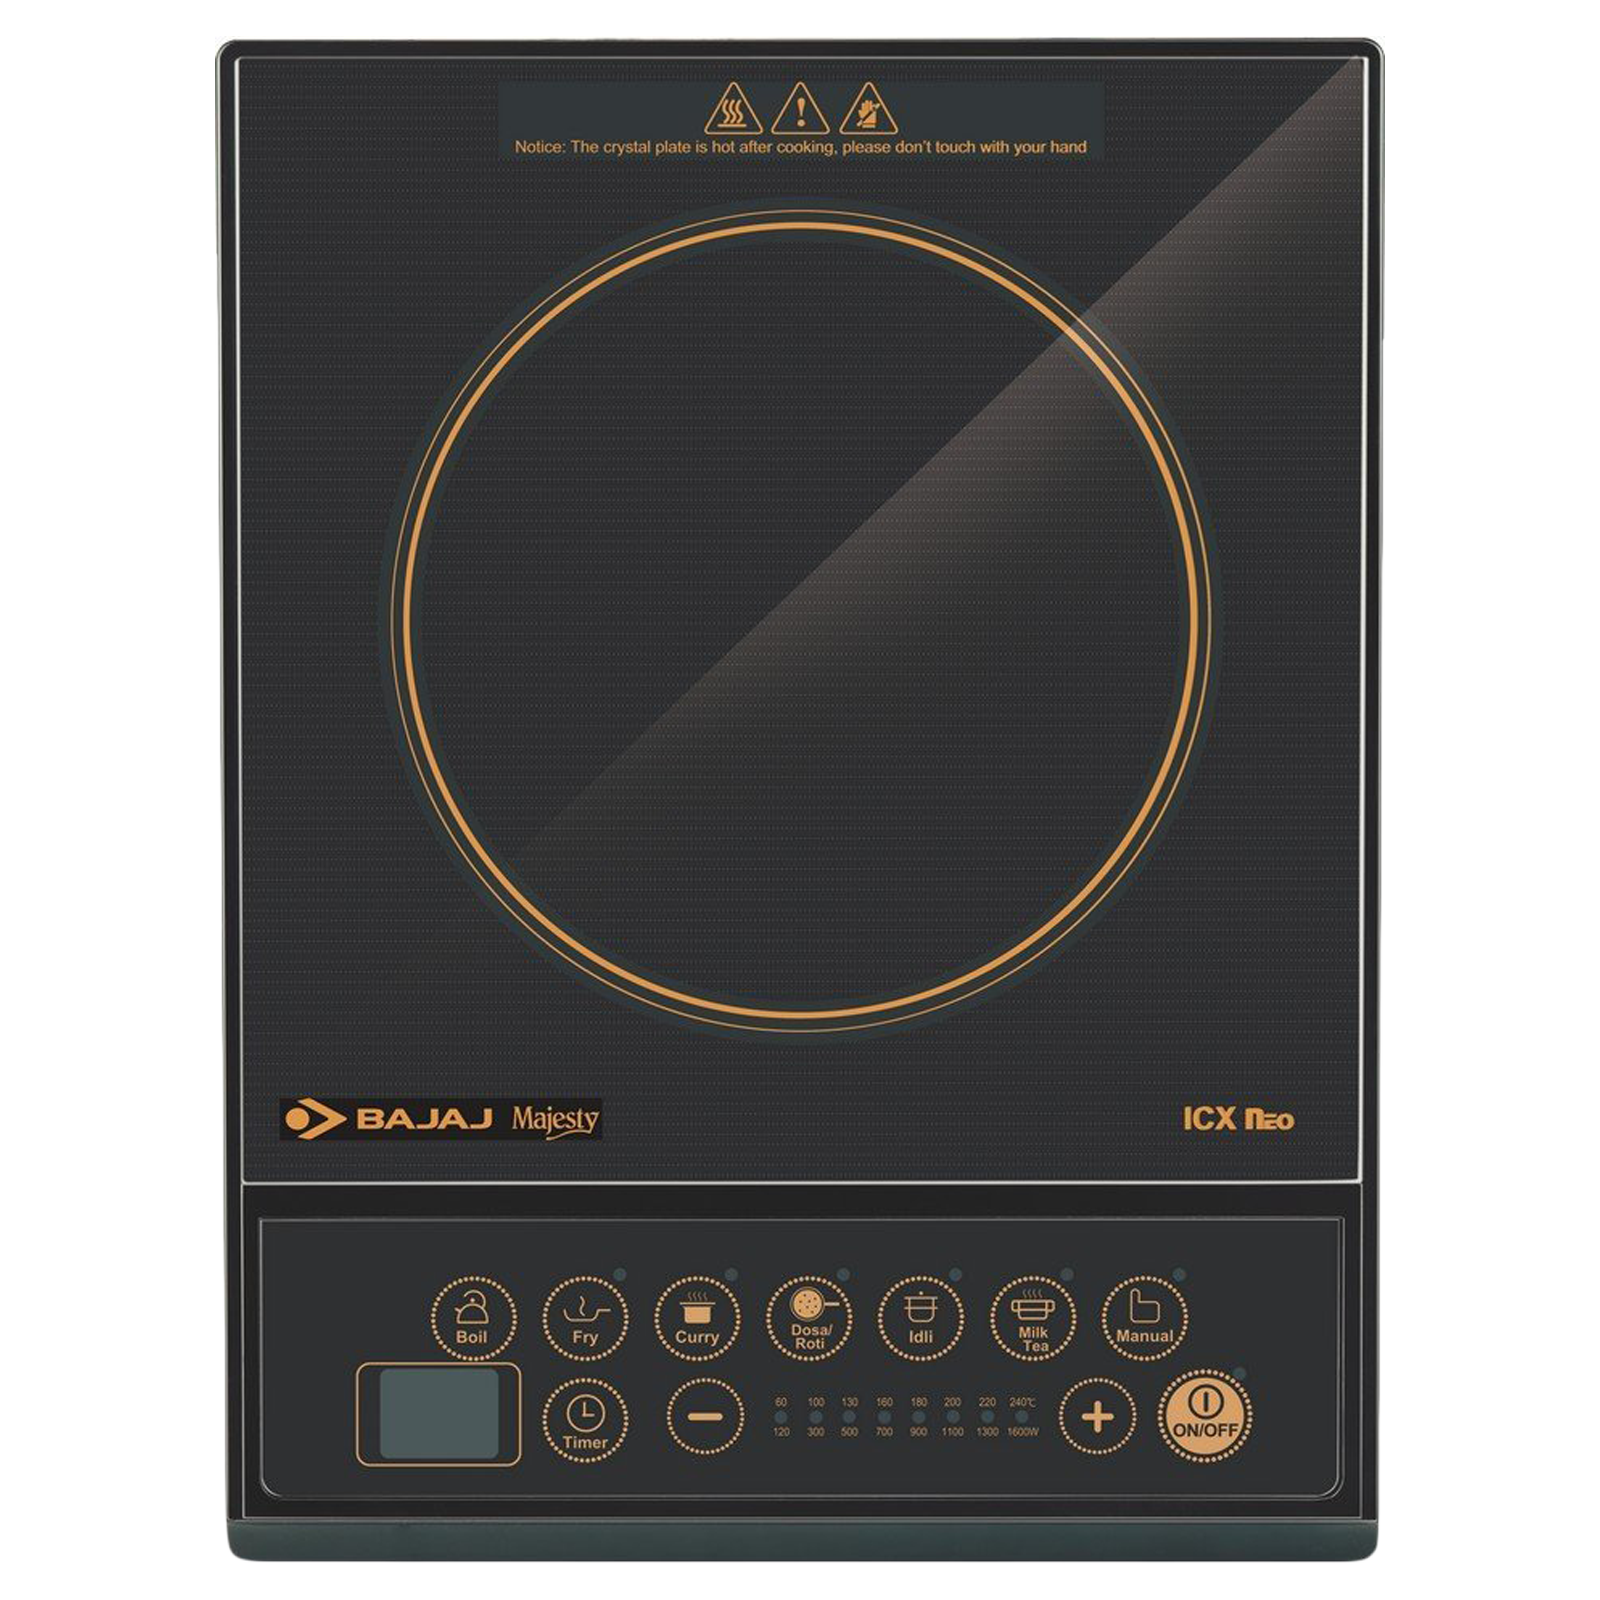 buy-bajaj-majesty-icx-neo-1600w-induction-cooktop-with-7-preset-menus-online-croma